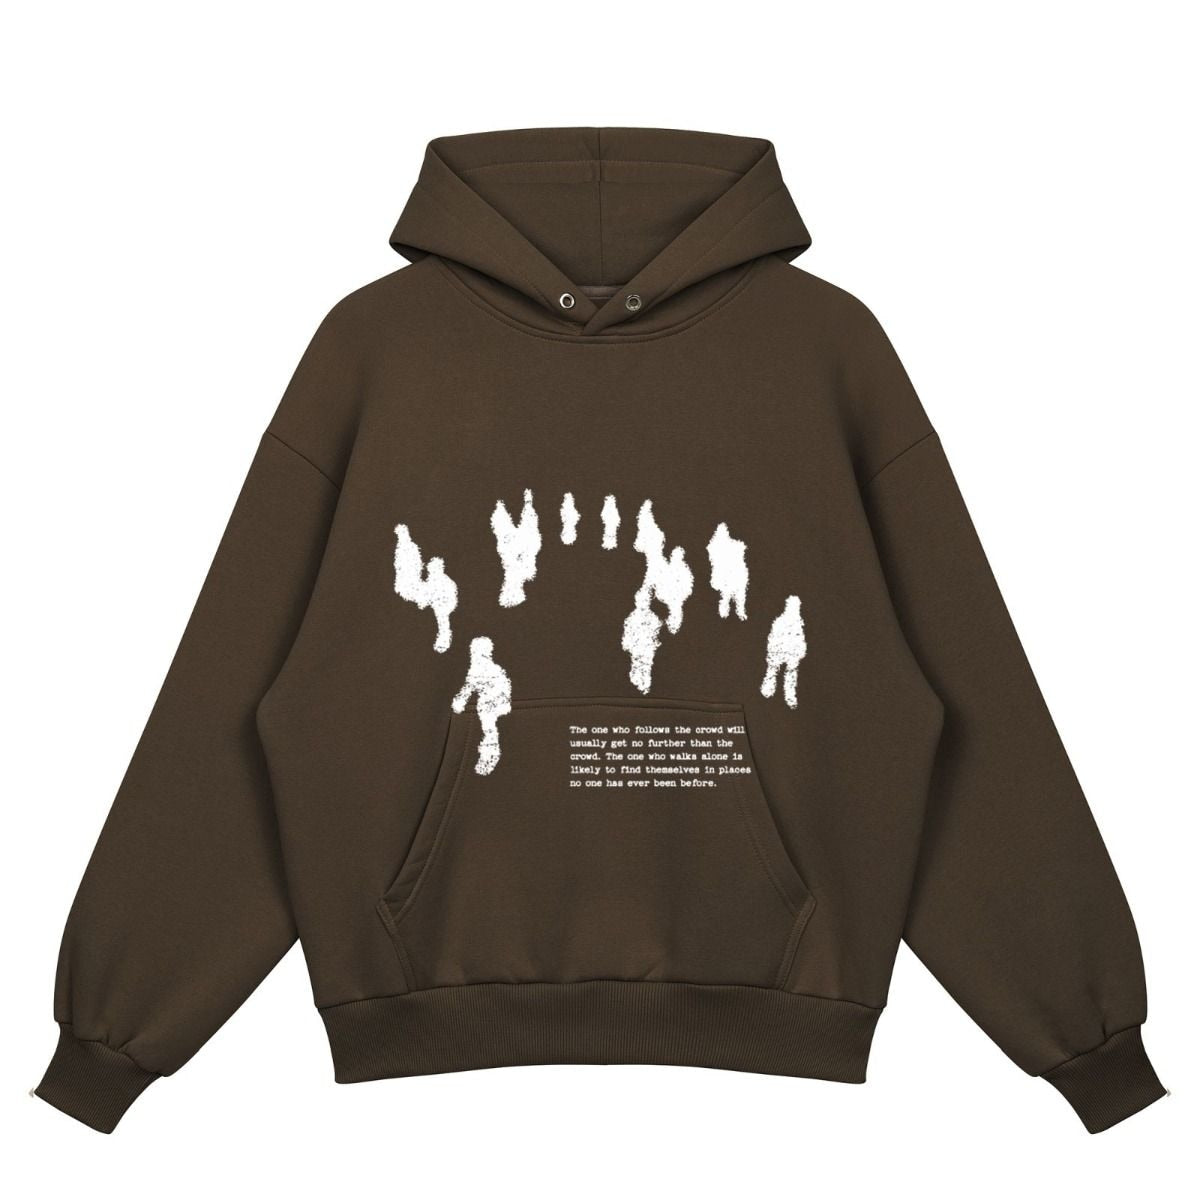 Don't Follow The Crowd Hoodie